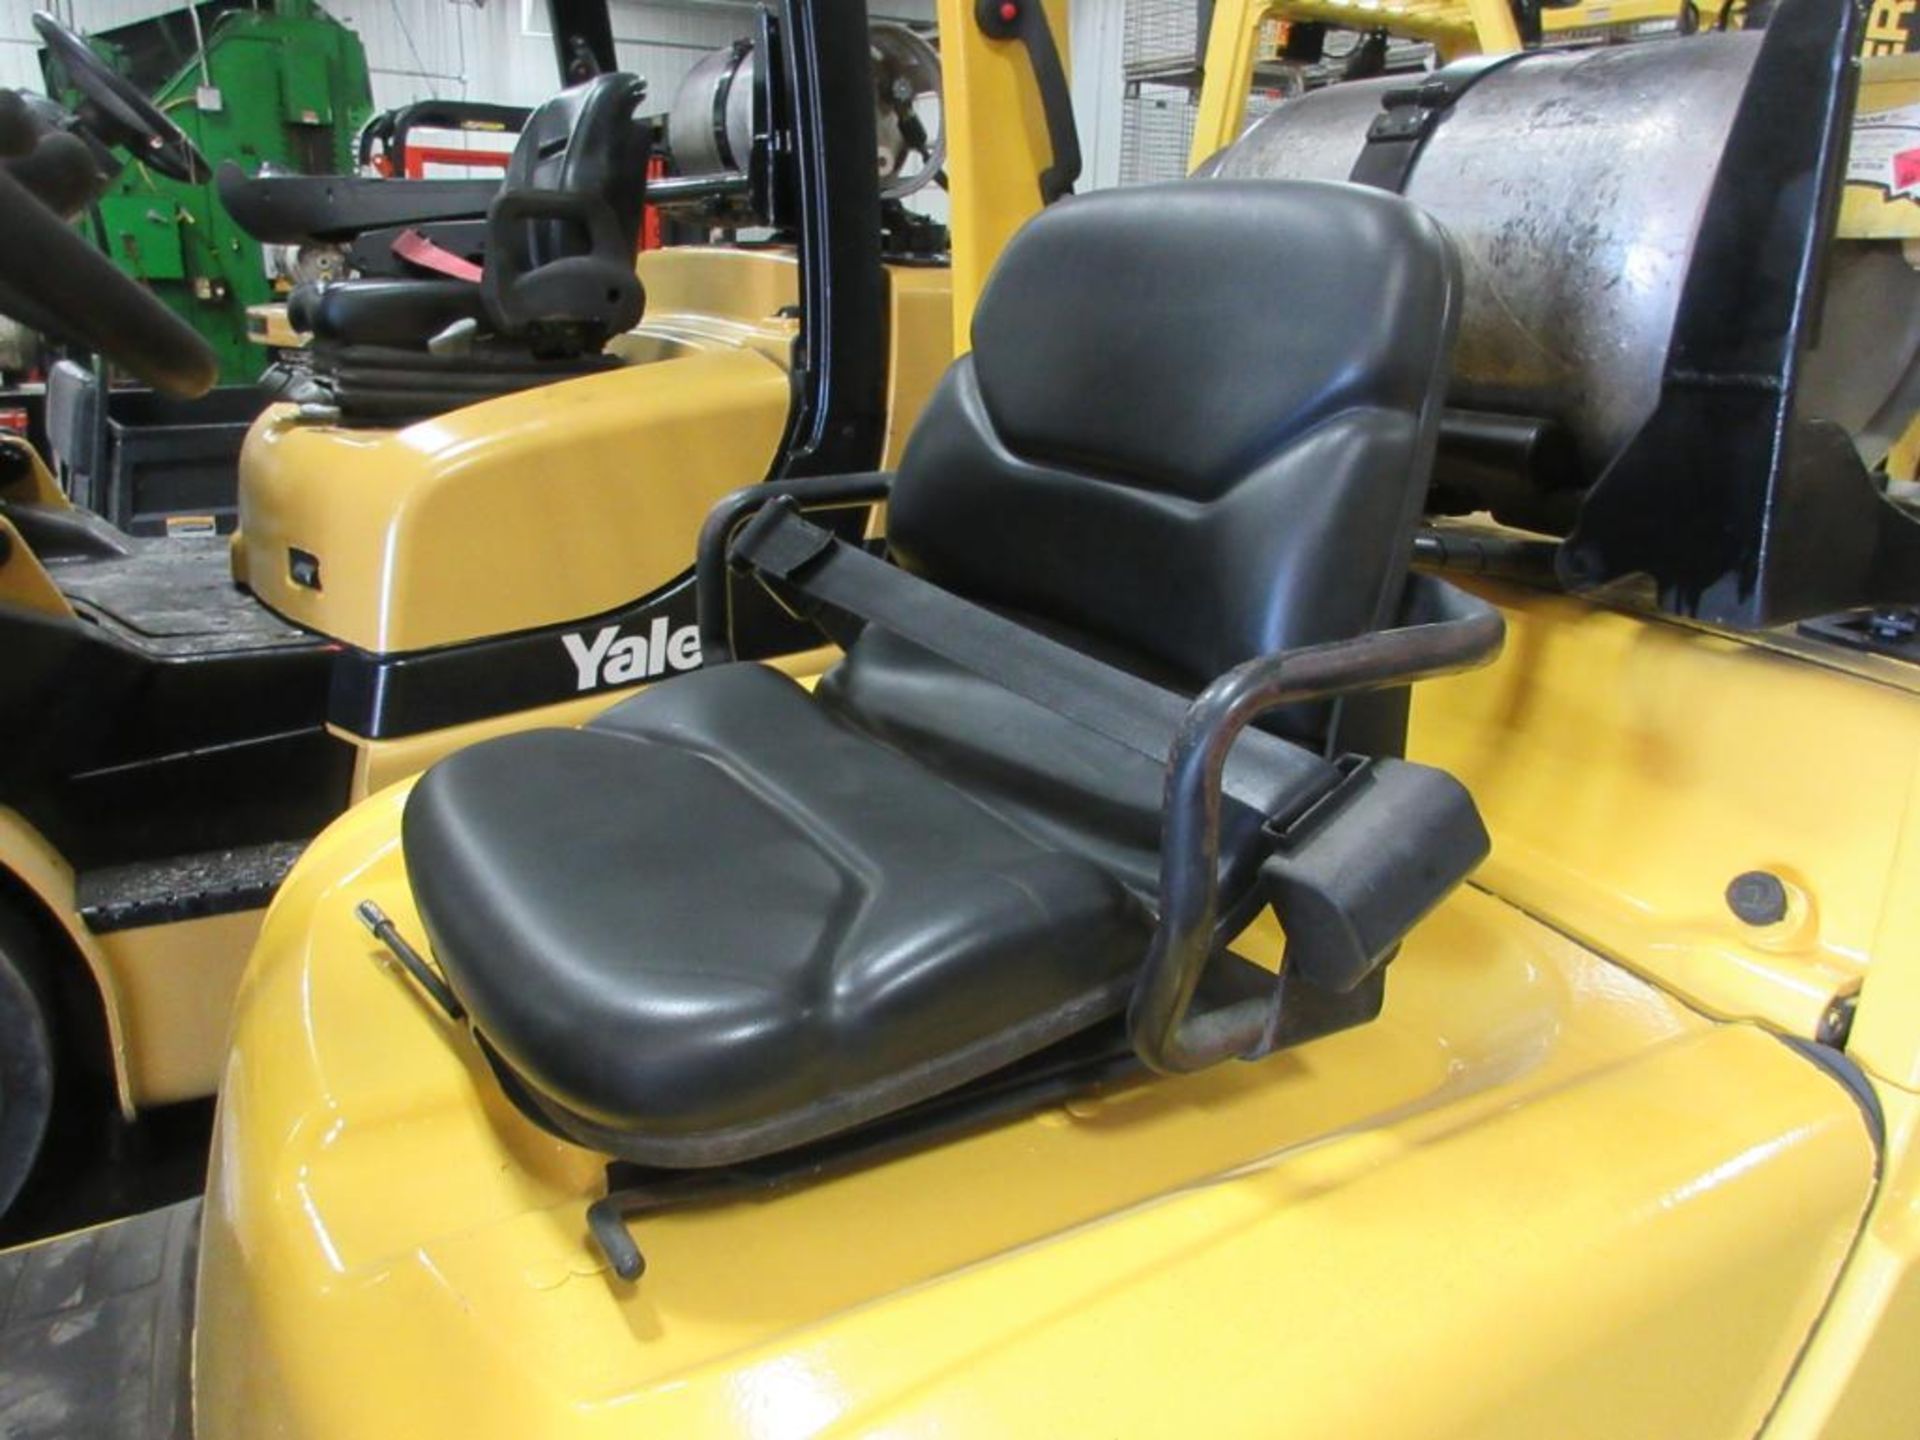 2009 HYSTER 7,000-LB. CAP. LPG FORKLIFT, 3-STAGE MAST, 187 IN. MAX. LOAD HT., CUSHION TIRES, LEVER - Image 5 of 6